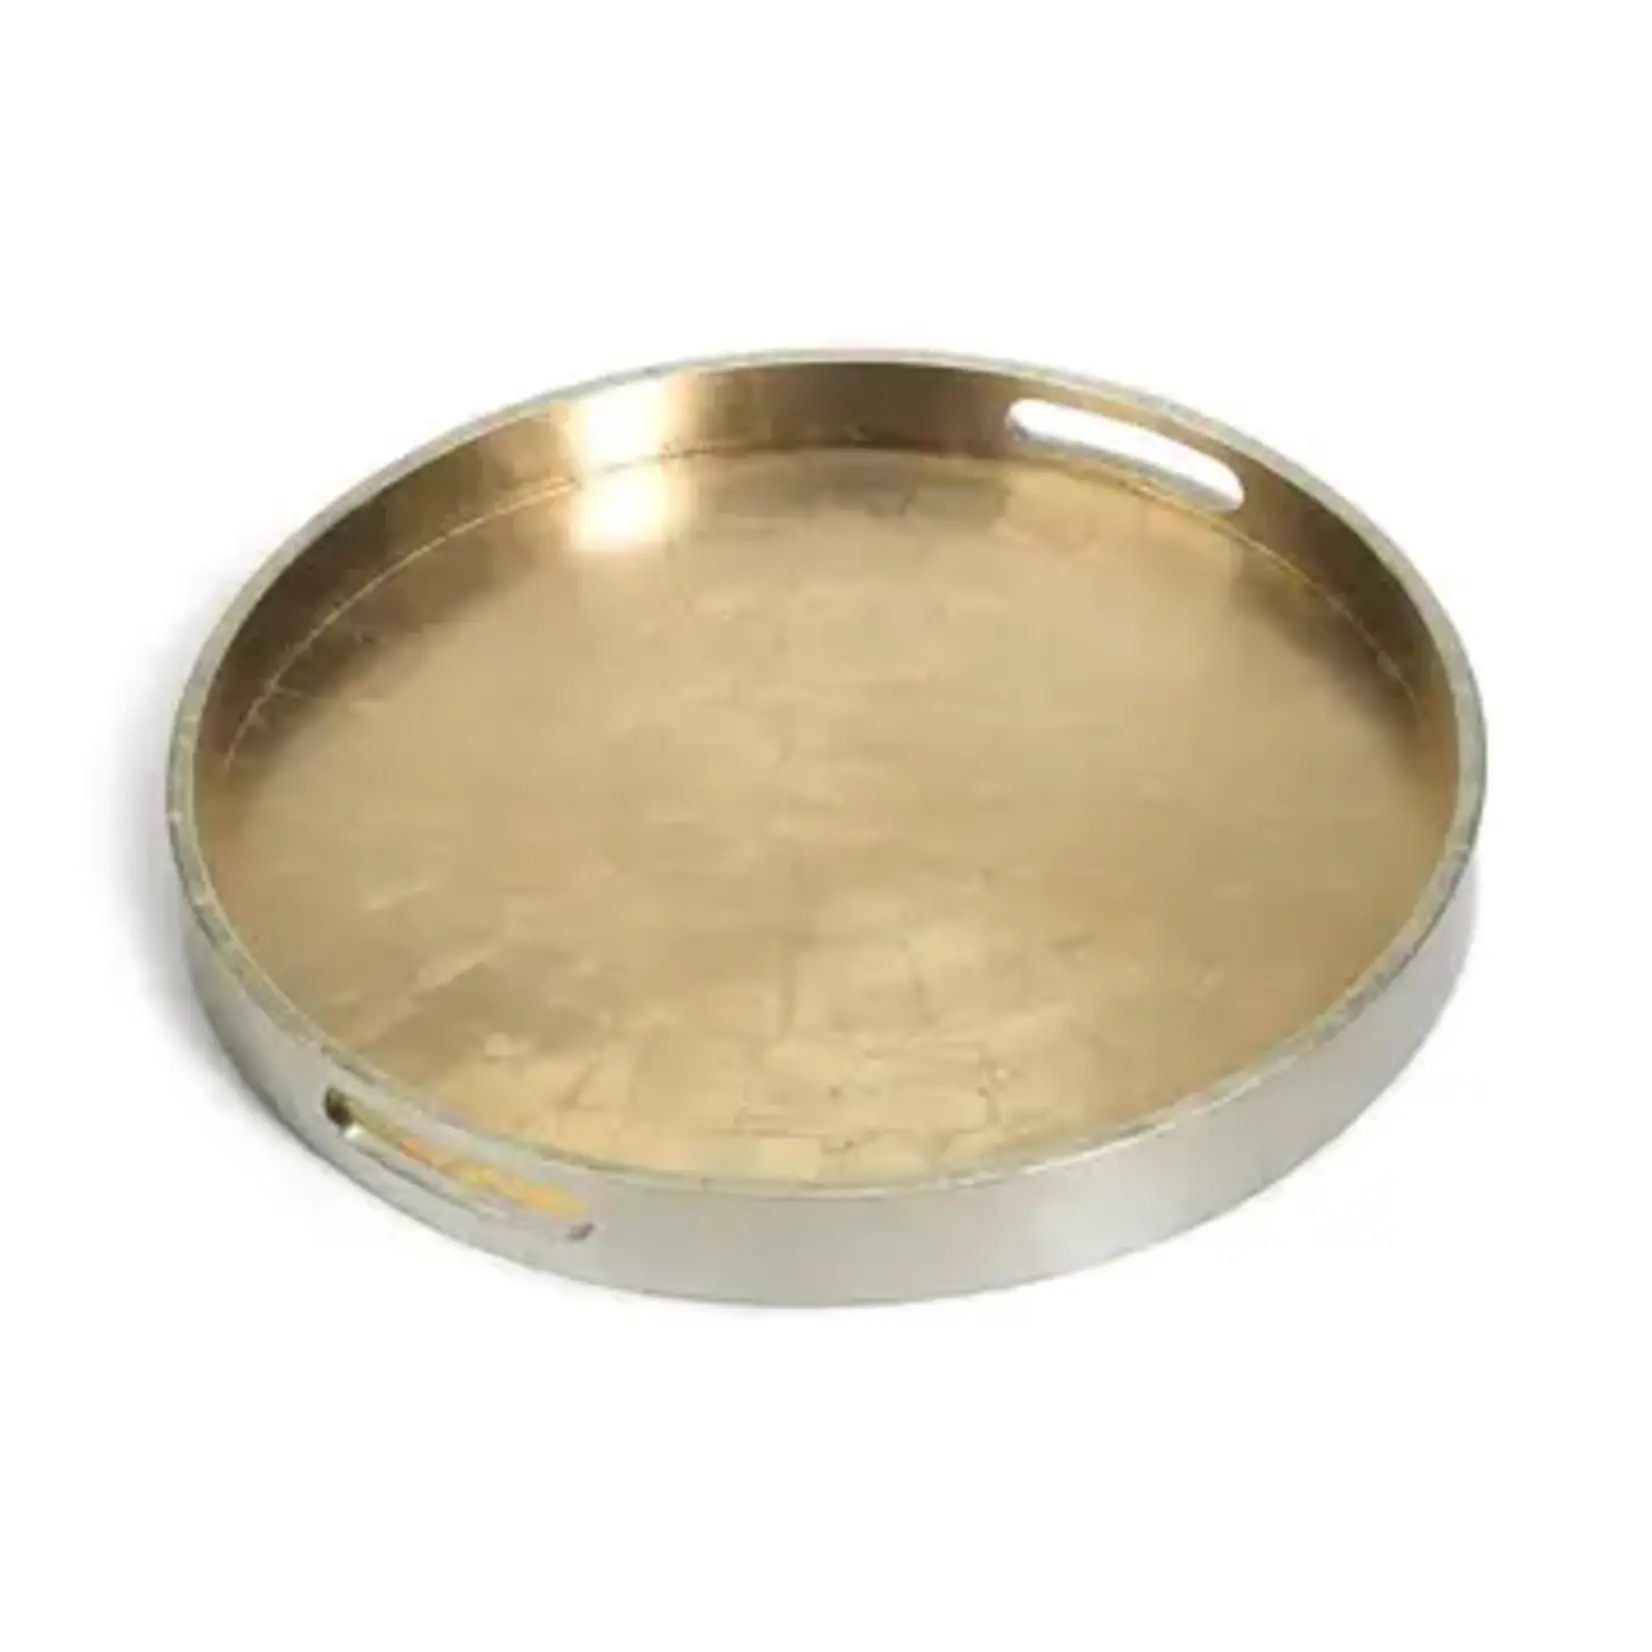 ZODAX ROUND ANTIQUE GOLD/SILVER SERVING TRAY